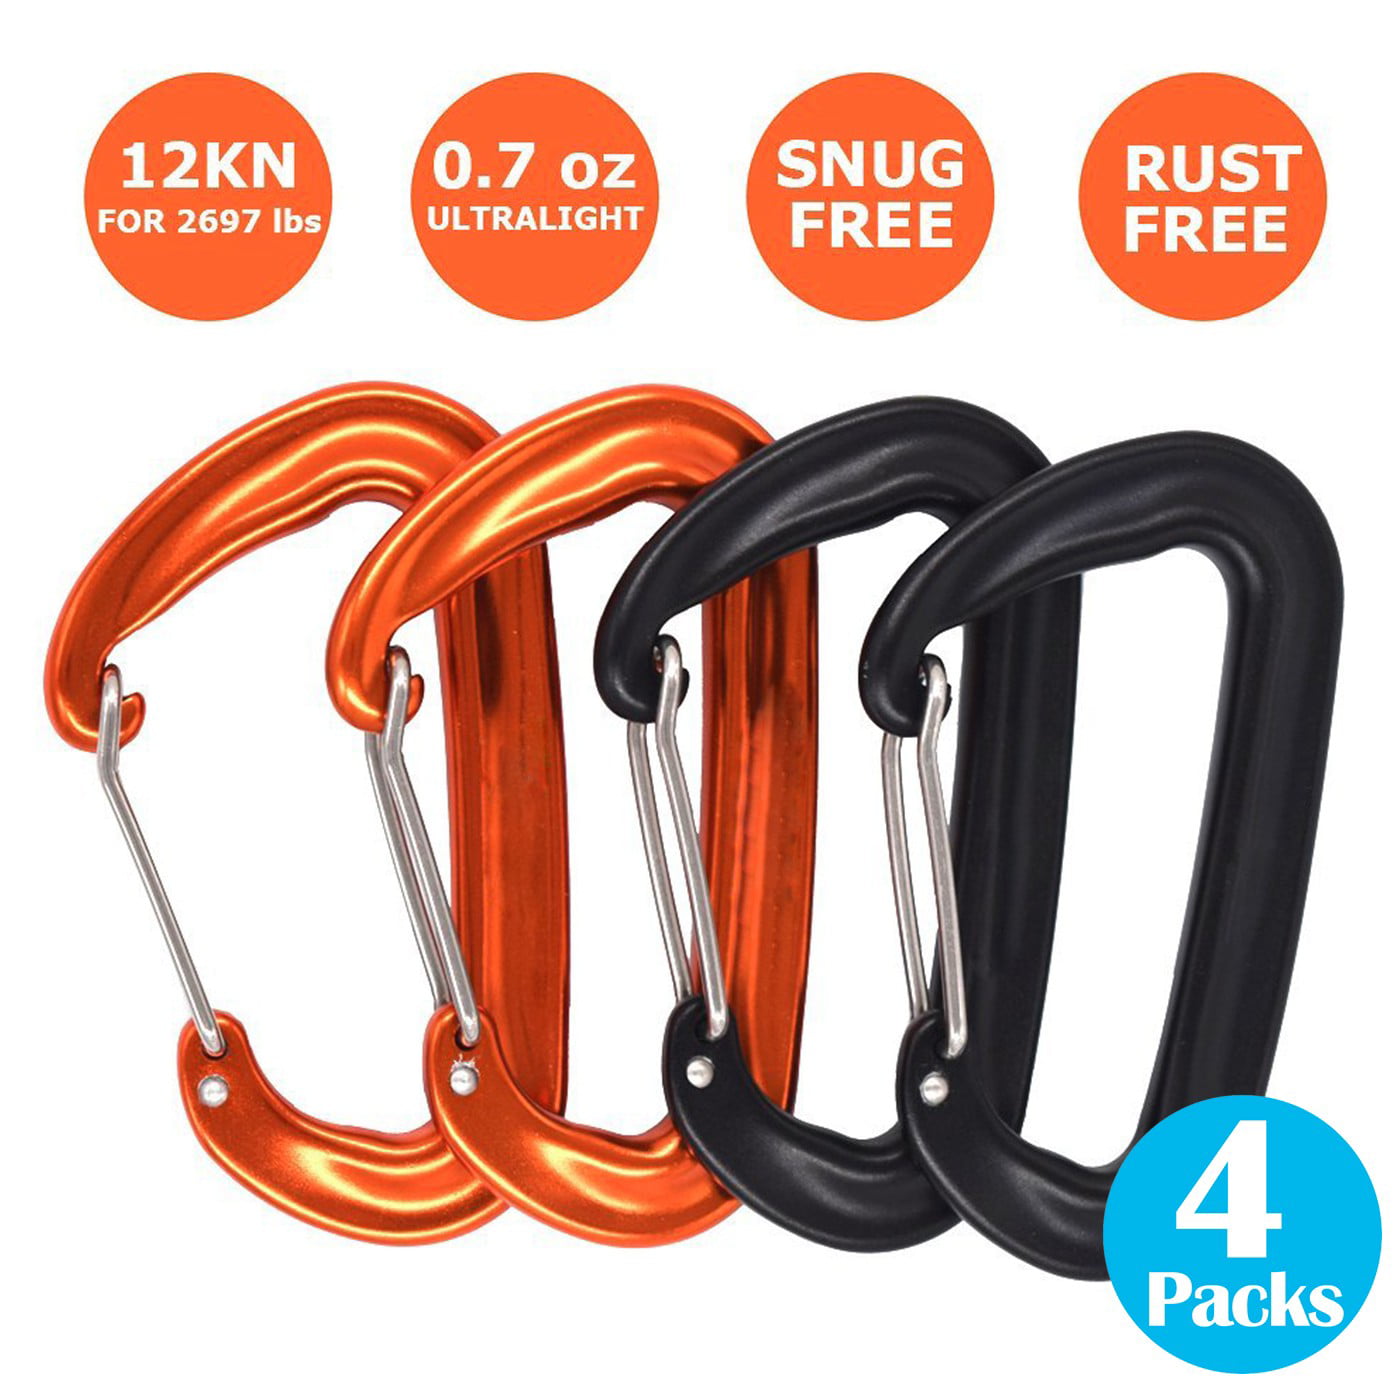 Carabiner Clips 12KN Heavy Duty Wiregate Carabiners for Camping Hammock 4 Pack 